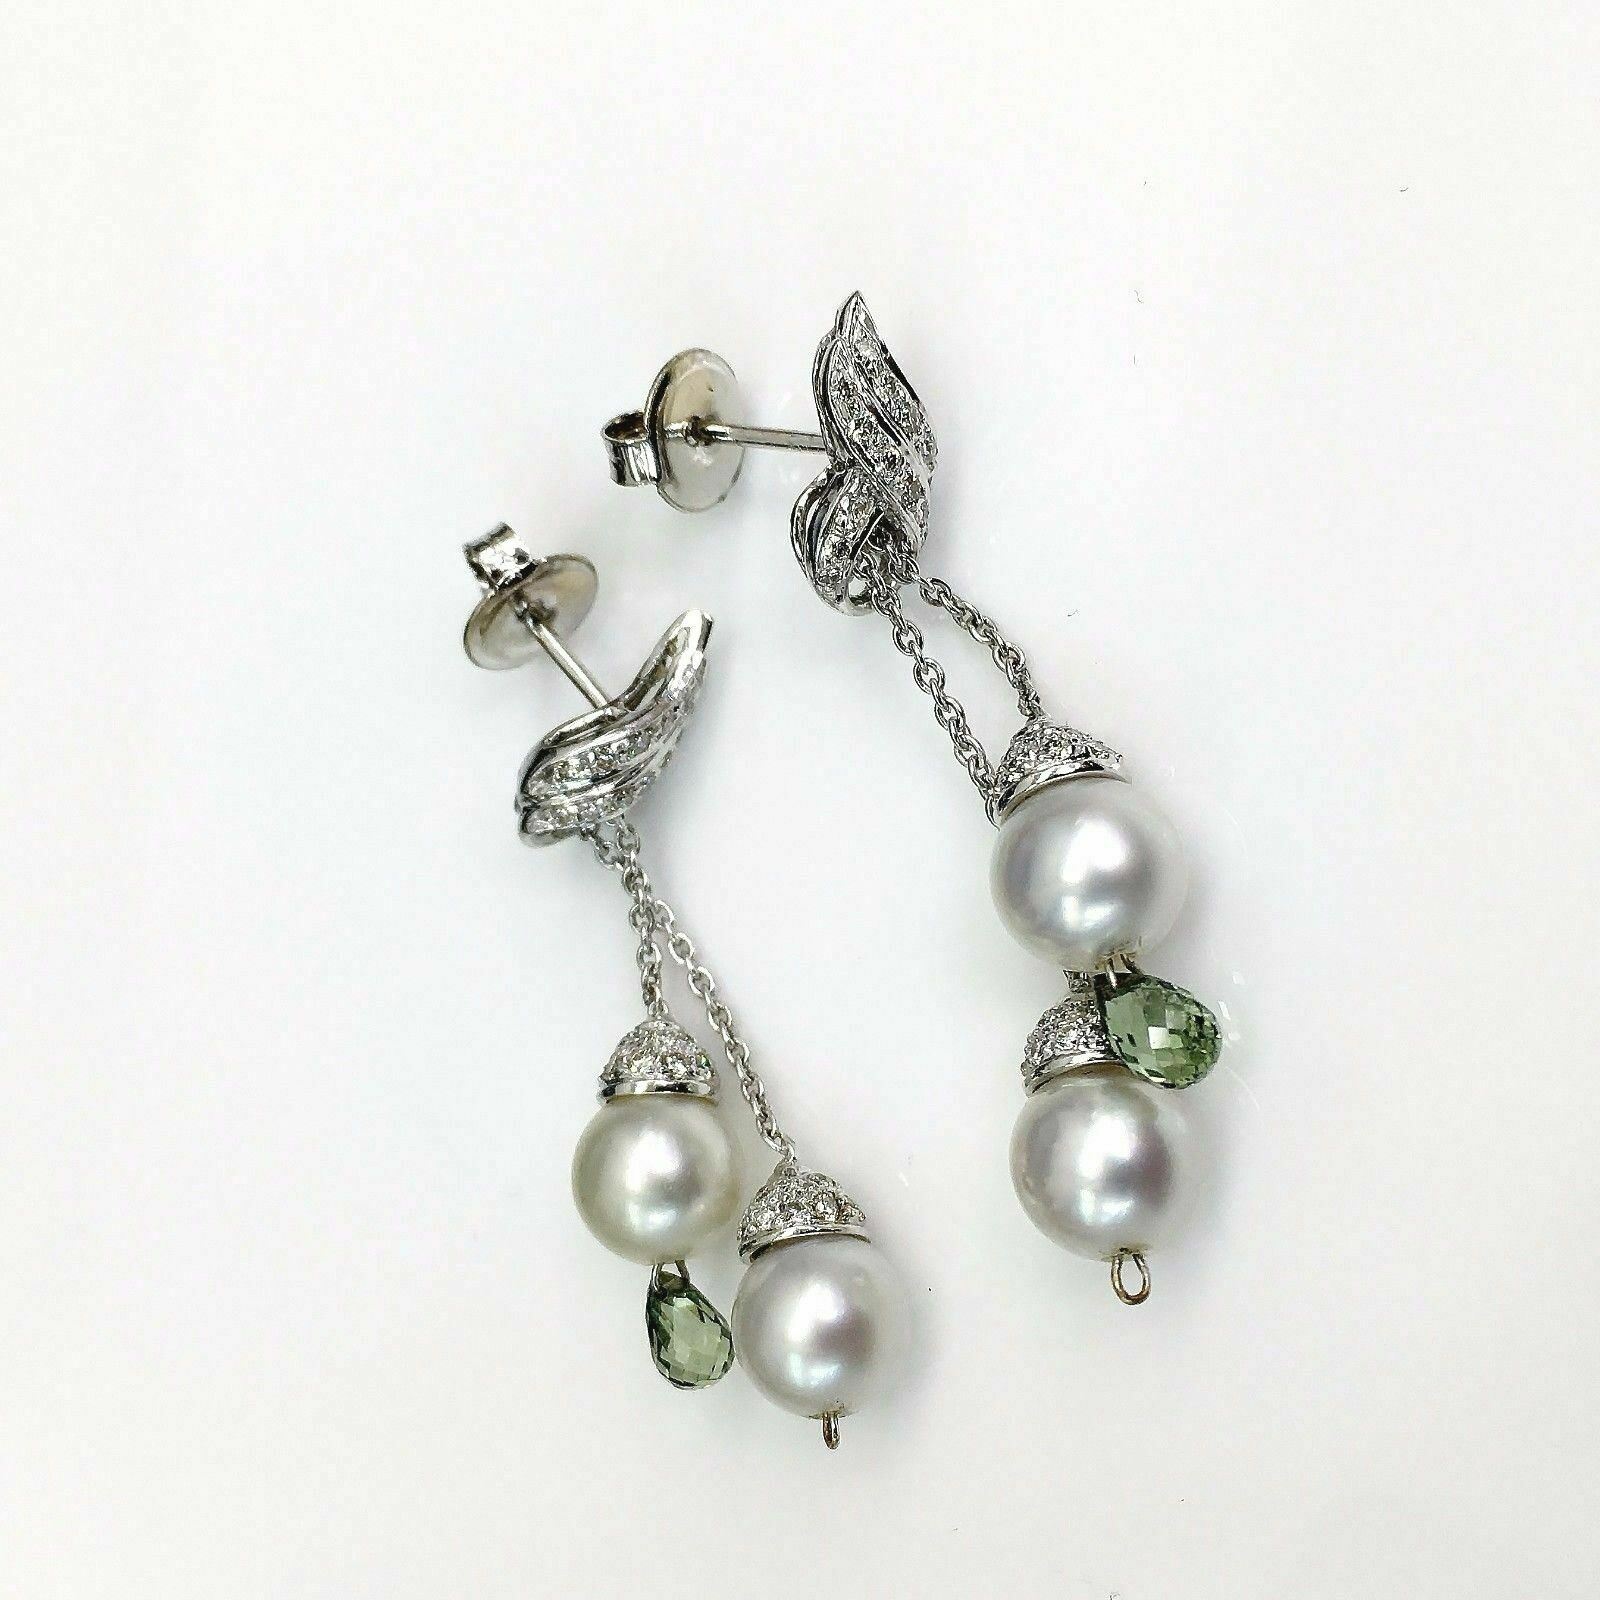 FINE 18kt White Gold Diamond and Pearl Drop Earrings